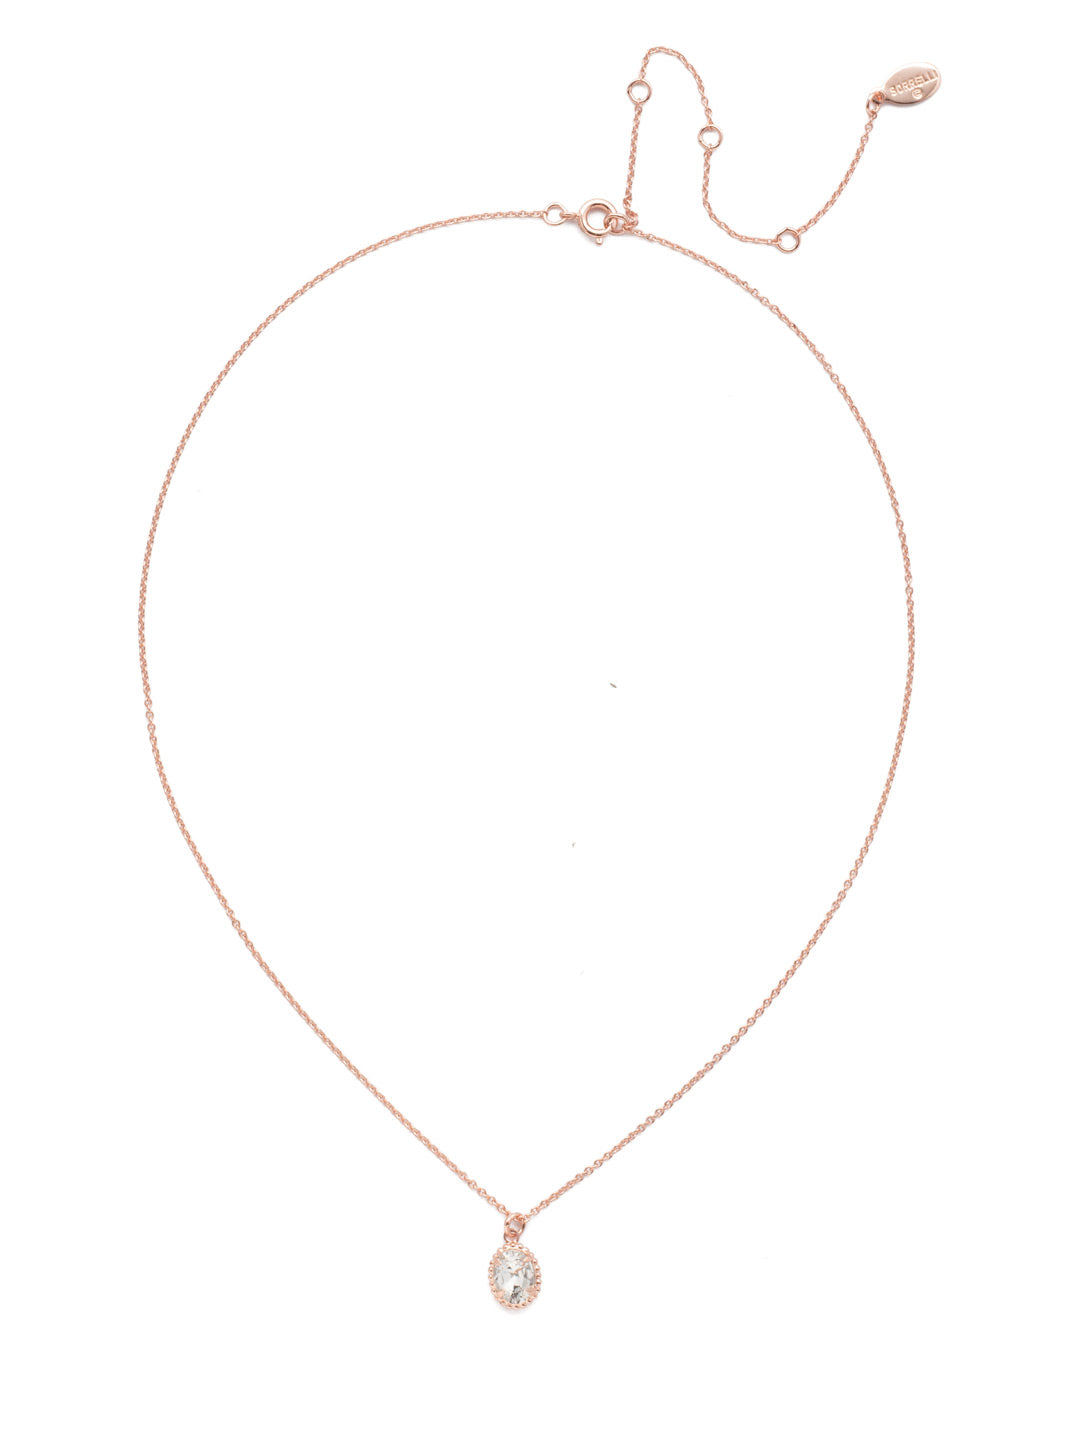 Maisie Pendant Necklace - NEF49RGCRY - <p>This is the perfect day-to-night sparkling tiny pendant necklace that has an adjustable chain to fit your neckline. From Sorrelli's Crystal collection in our Rose Gold-tone finish.</p>